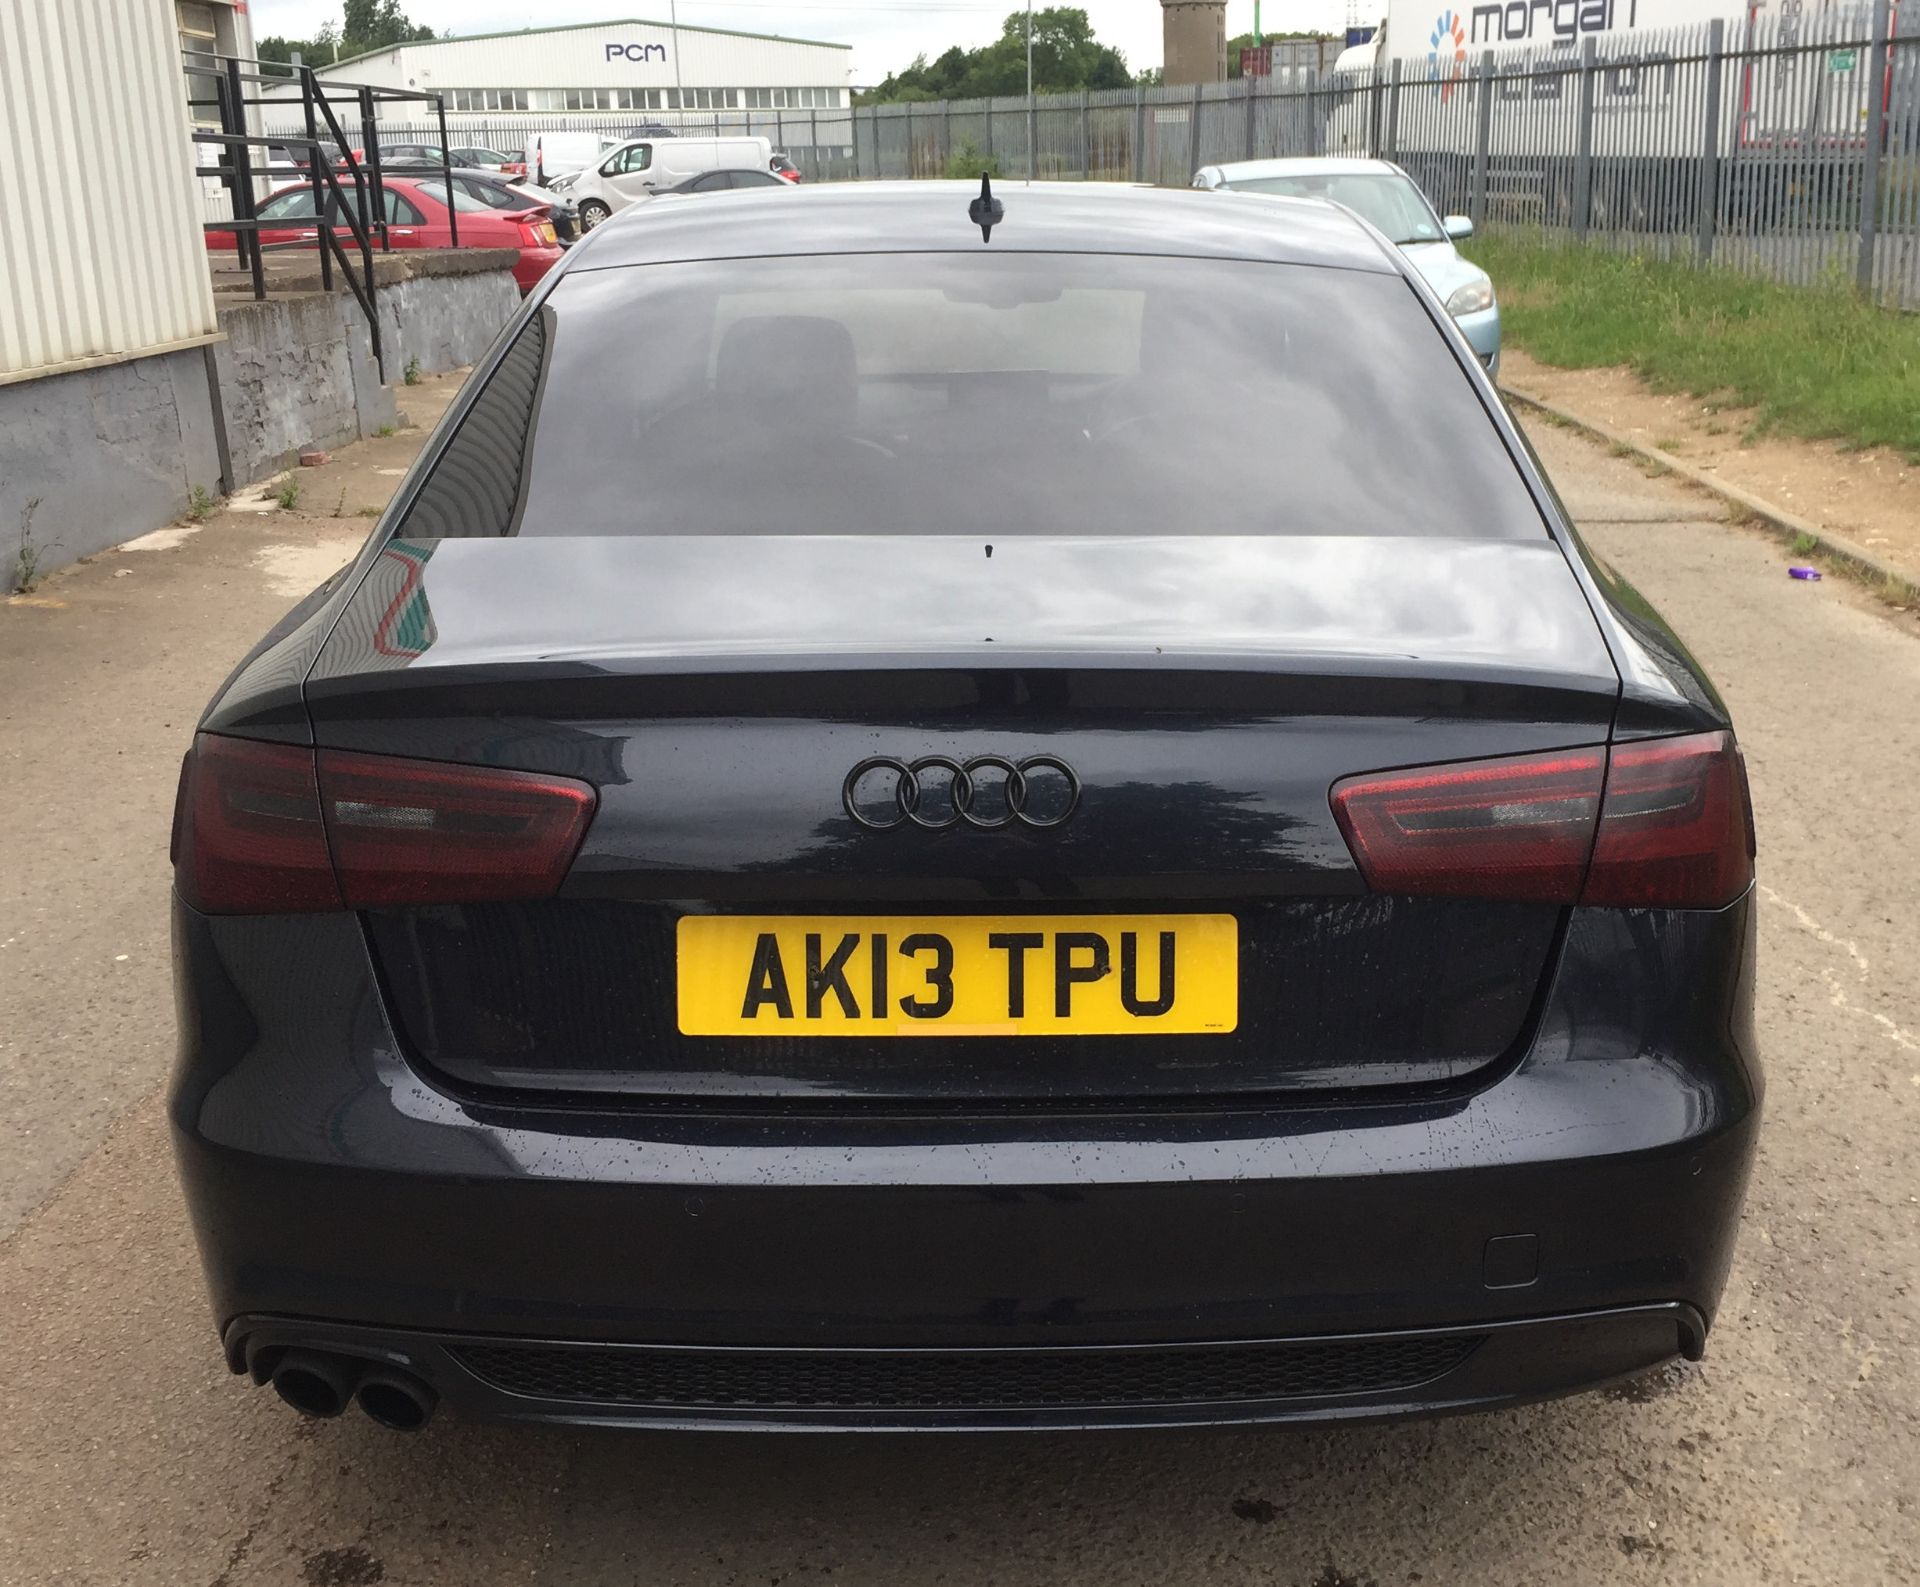 2013 Audi A6 2.0 Tdi S Line Black Edition 4 Dr Saloon - CL505 - NO VAT ON THE HAMMER - Location: Cor - Image 20 of 20